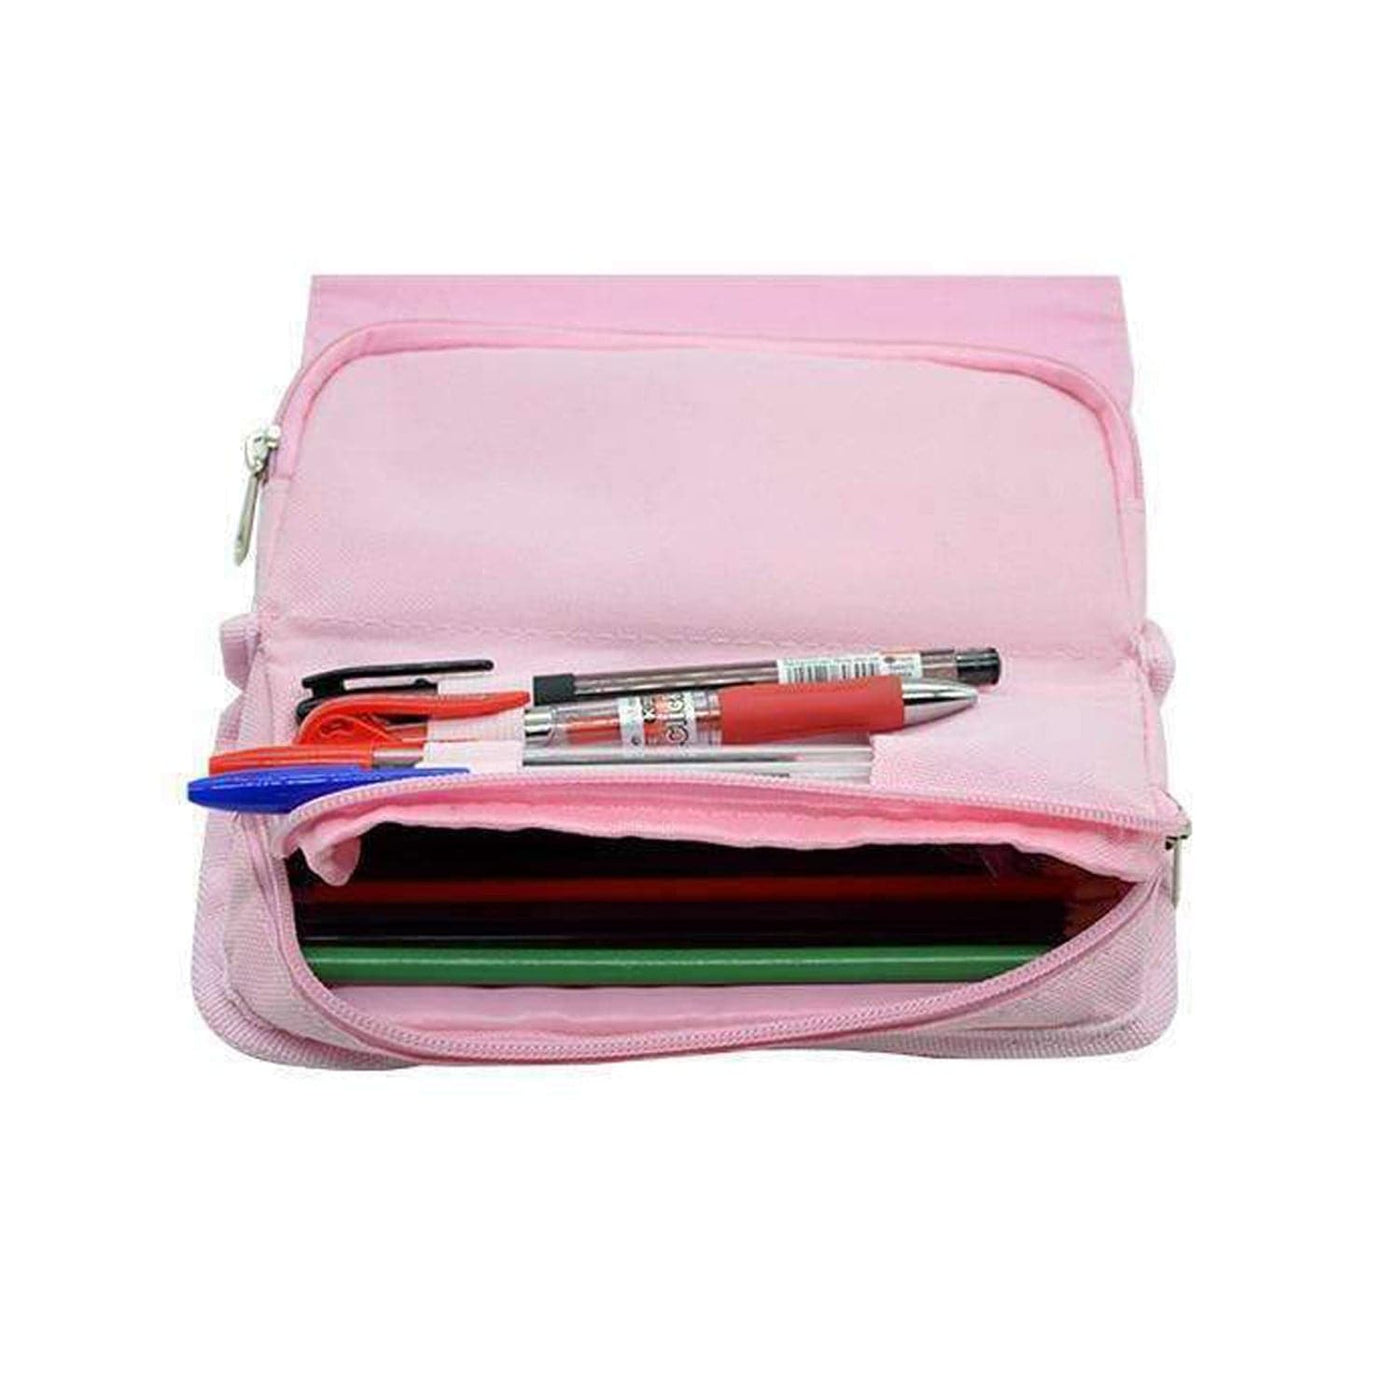 When In Doubt Travel - Travel Pencil Case